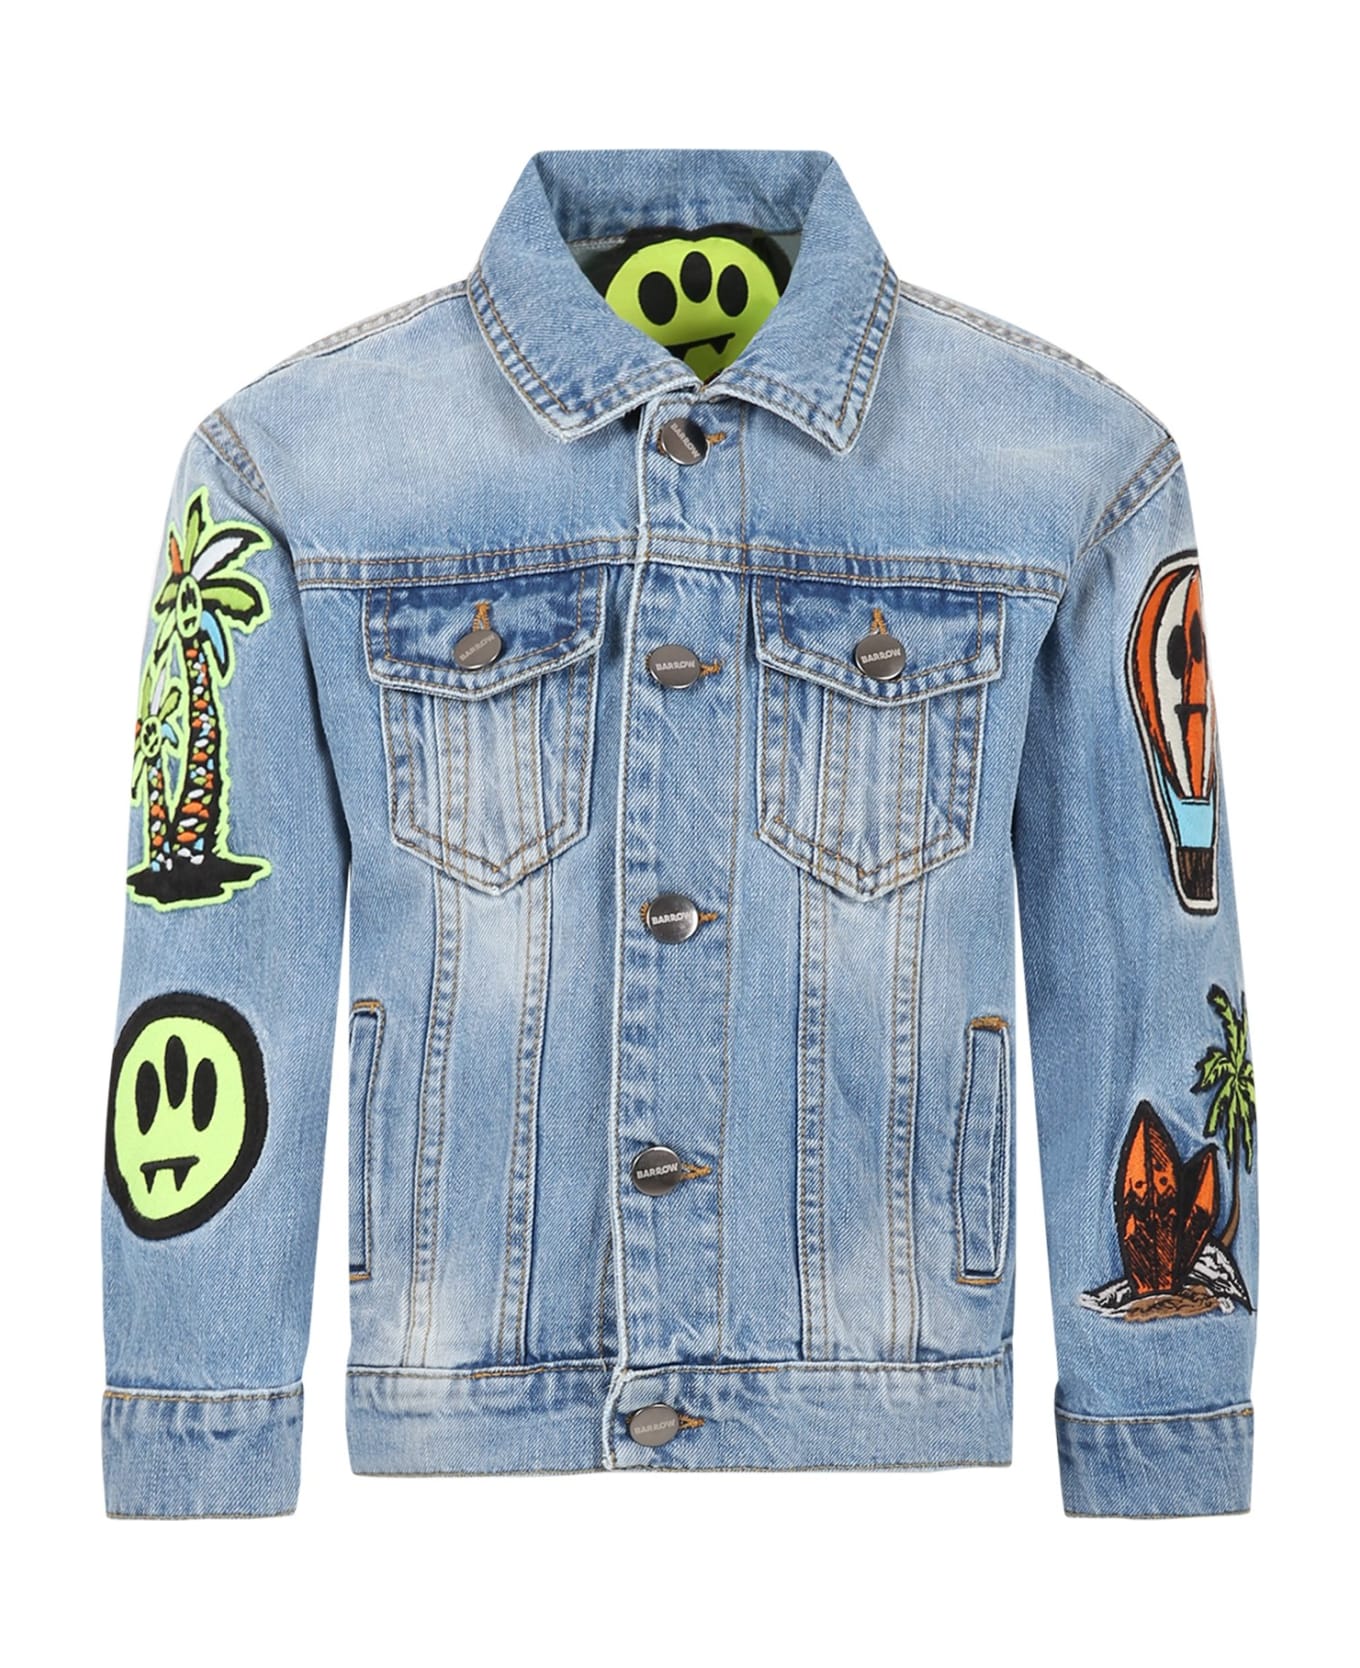 Barrow Light Blue Jacket For Kids With Iconic Smiley And Patch - 200